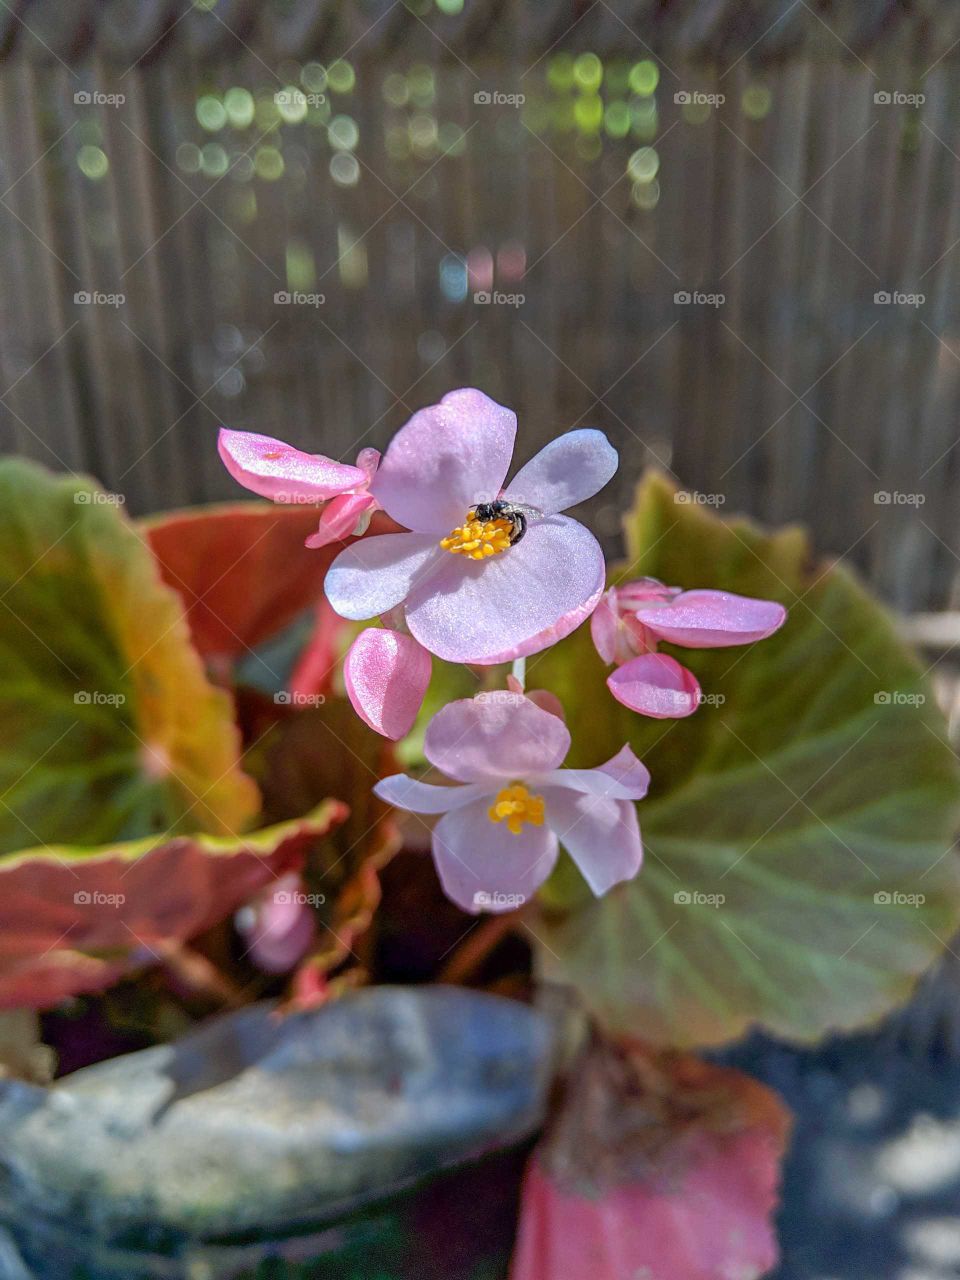 Tiny pink flowers pollinated by a bee. This is common plant found in most Filipino gardens.